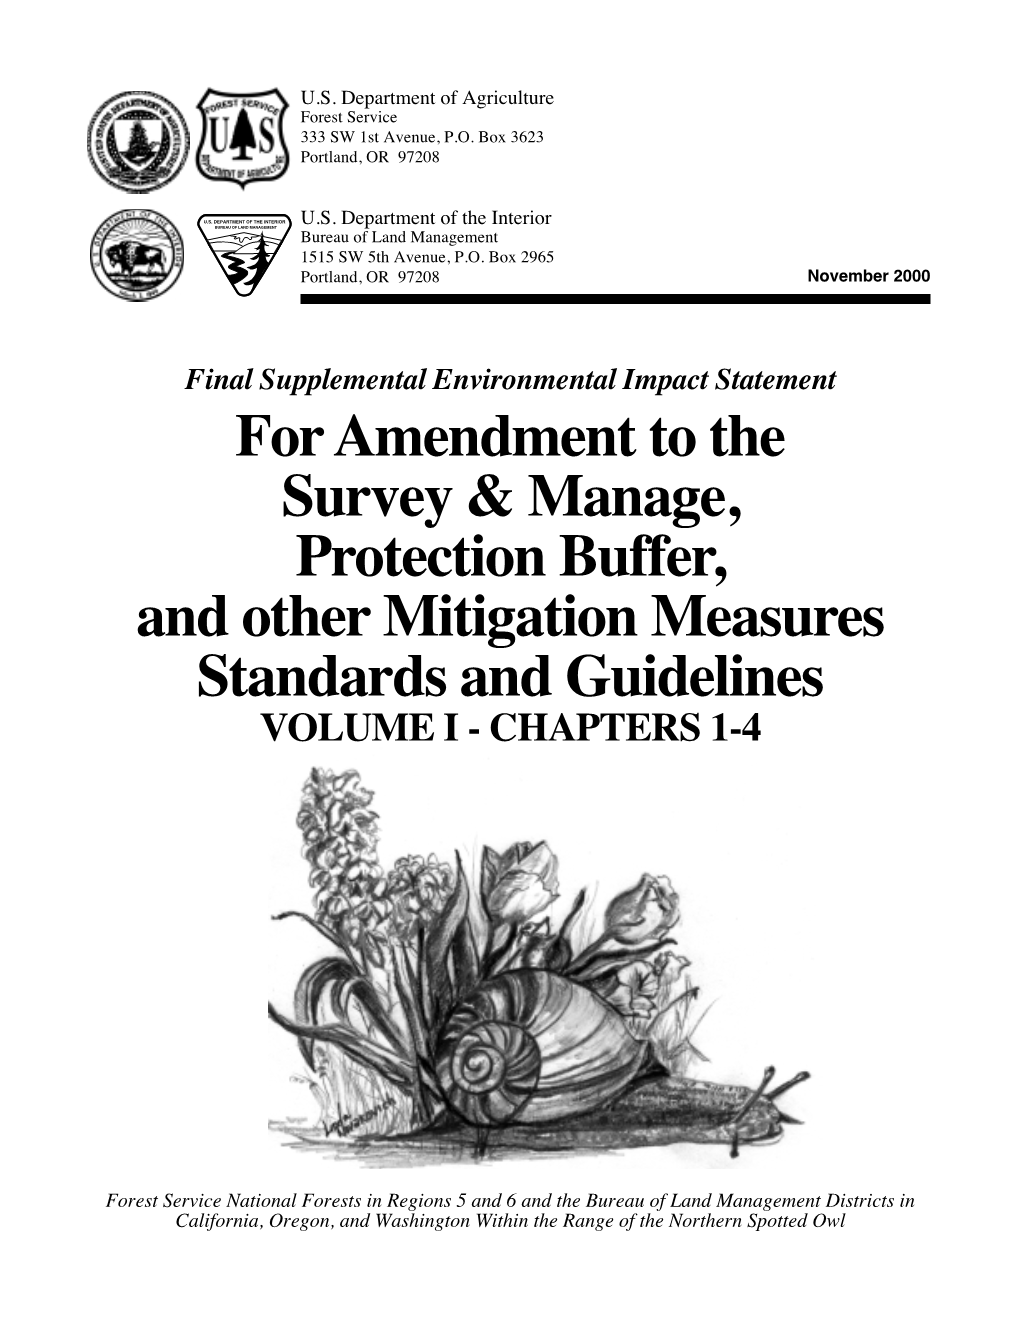 Mitigation Measures Standards and Guidelines VOLUME I - CHAPTERS 1-4